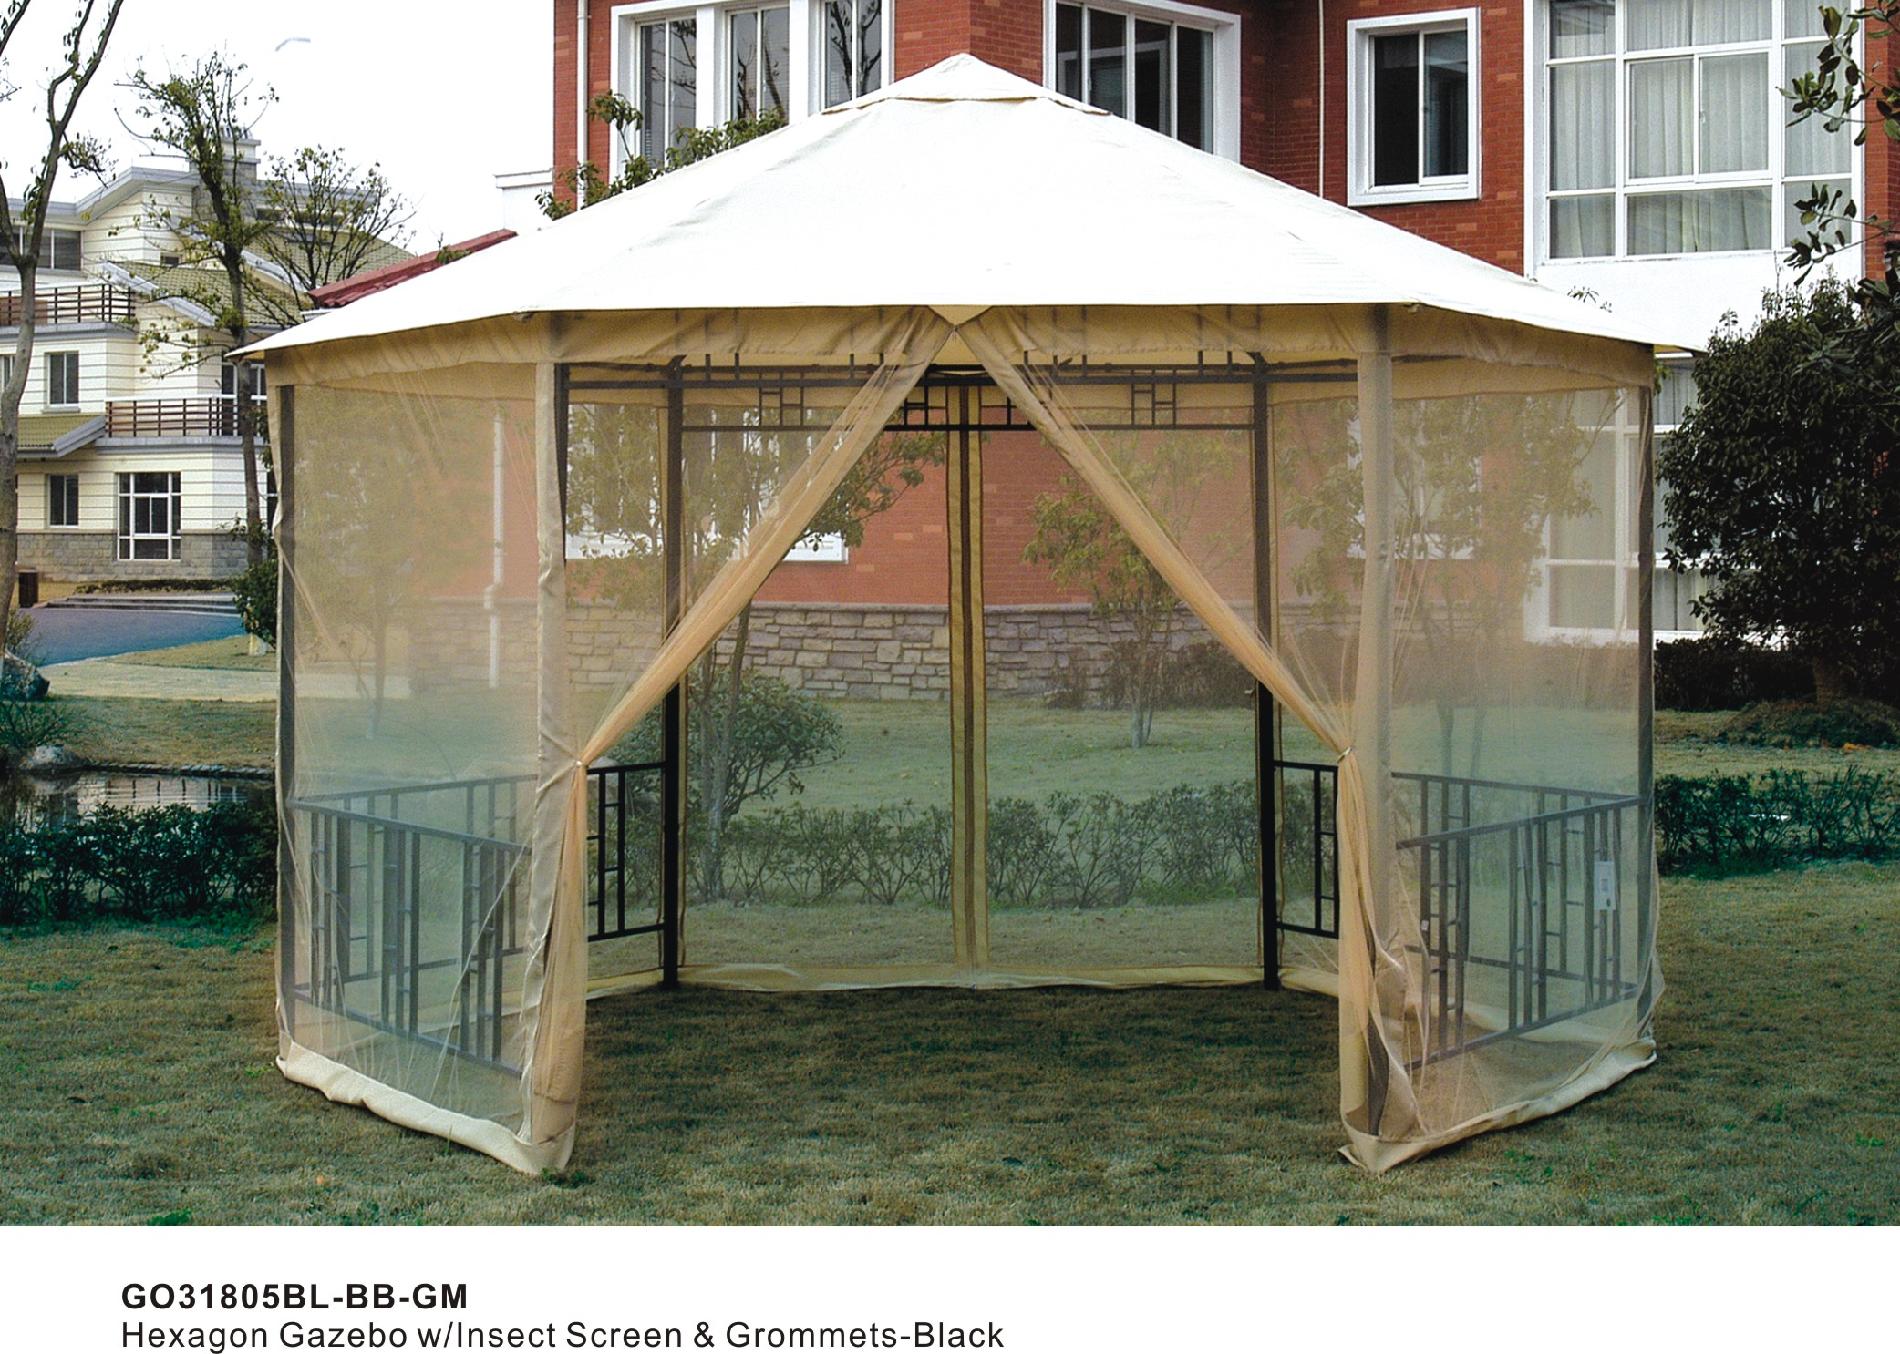 Hexagon Gazebo with Insect Screen - Black